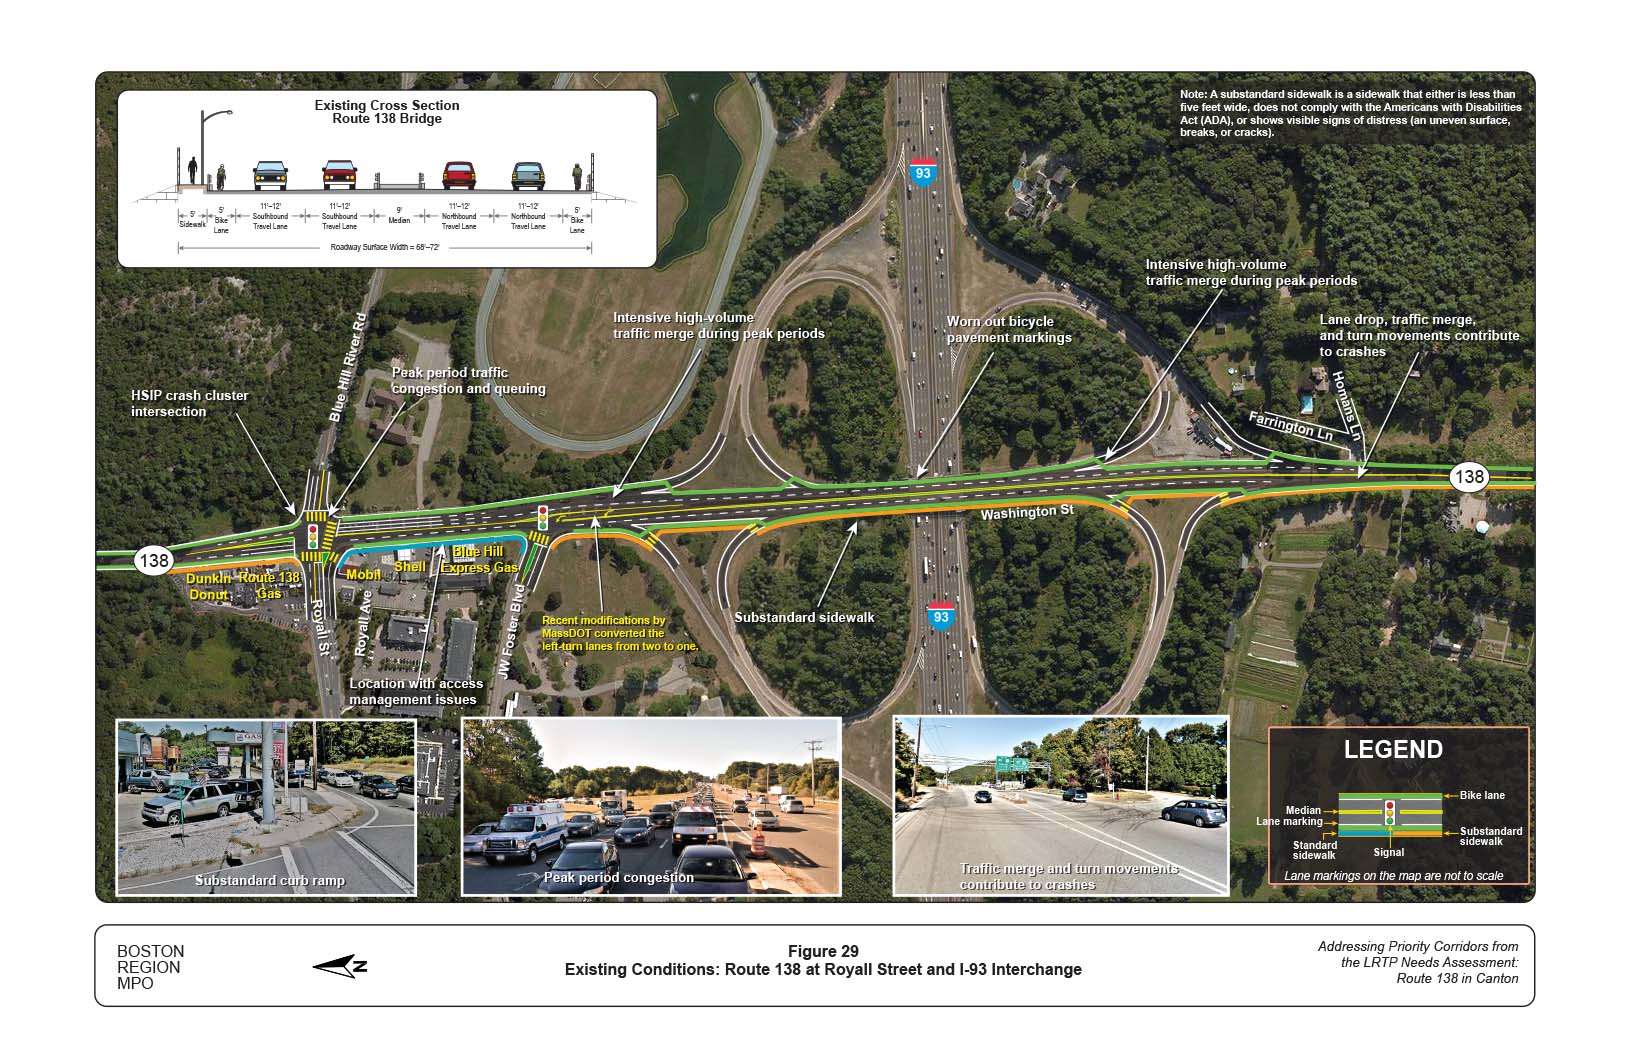 Figure 29 is a map of Route 138 at the Interstate 93 interchange and Royall Street with overlays showing the locations of existing problems on the roadway and a graphic of the current cross section of the roadway